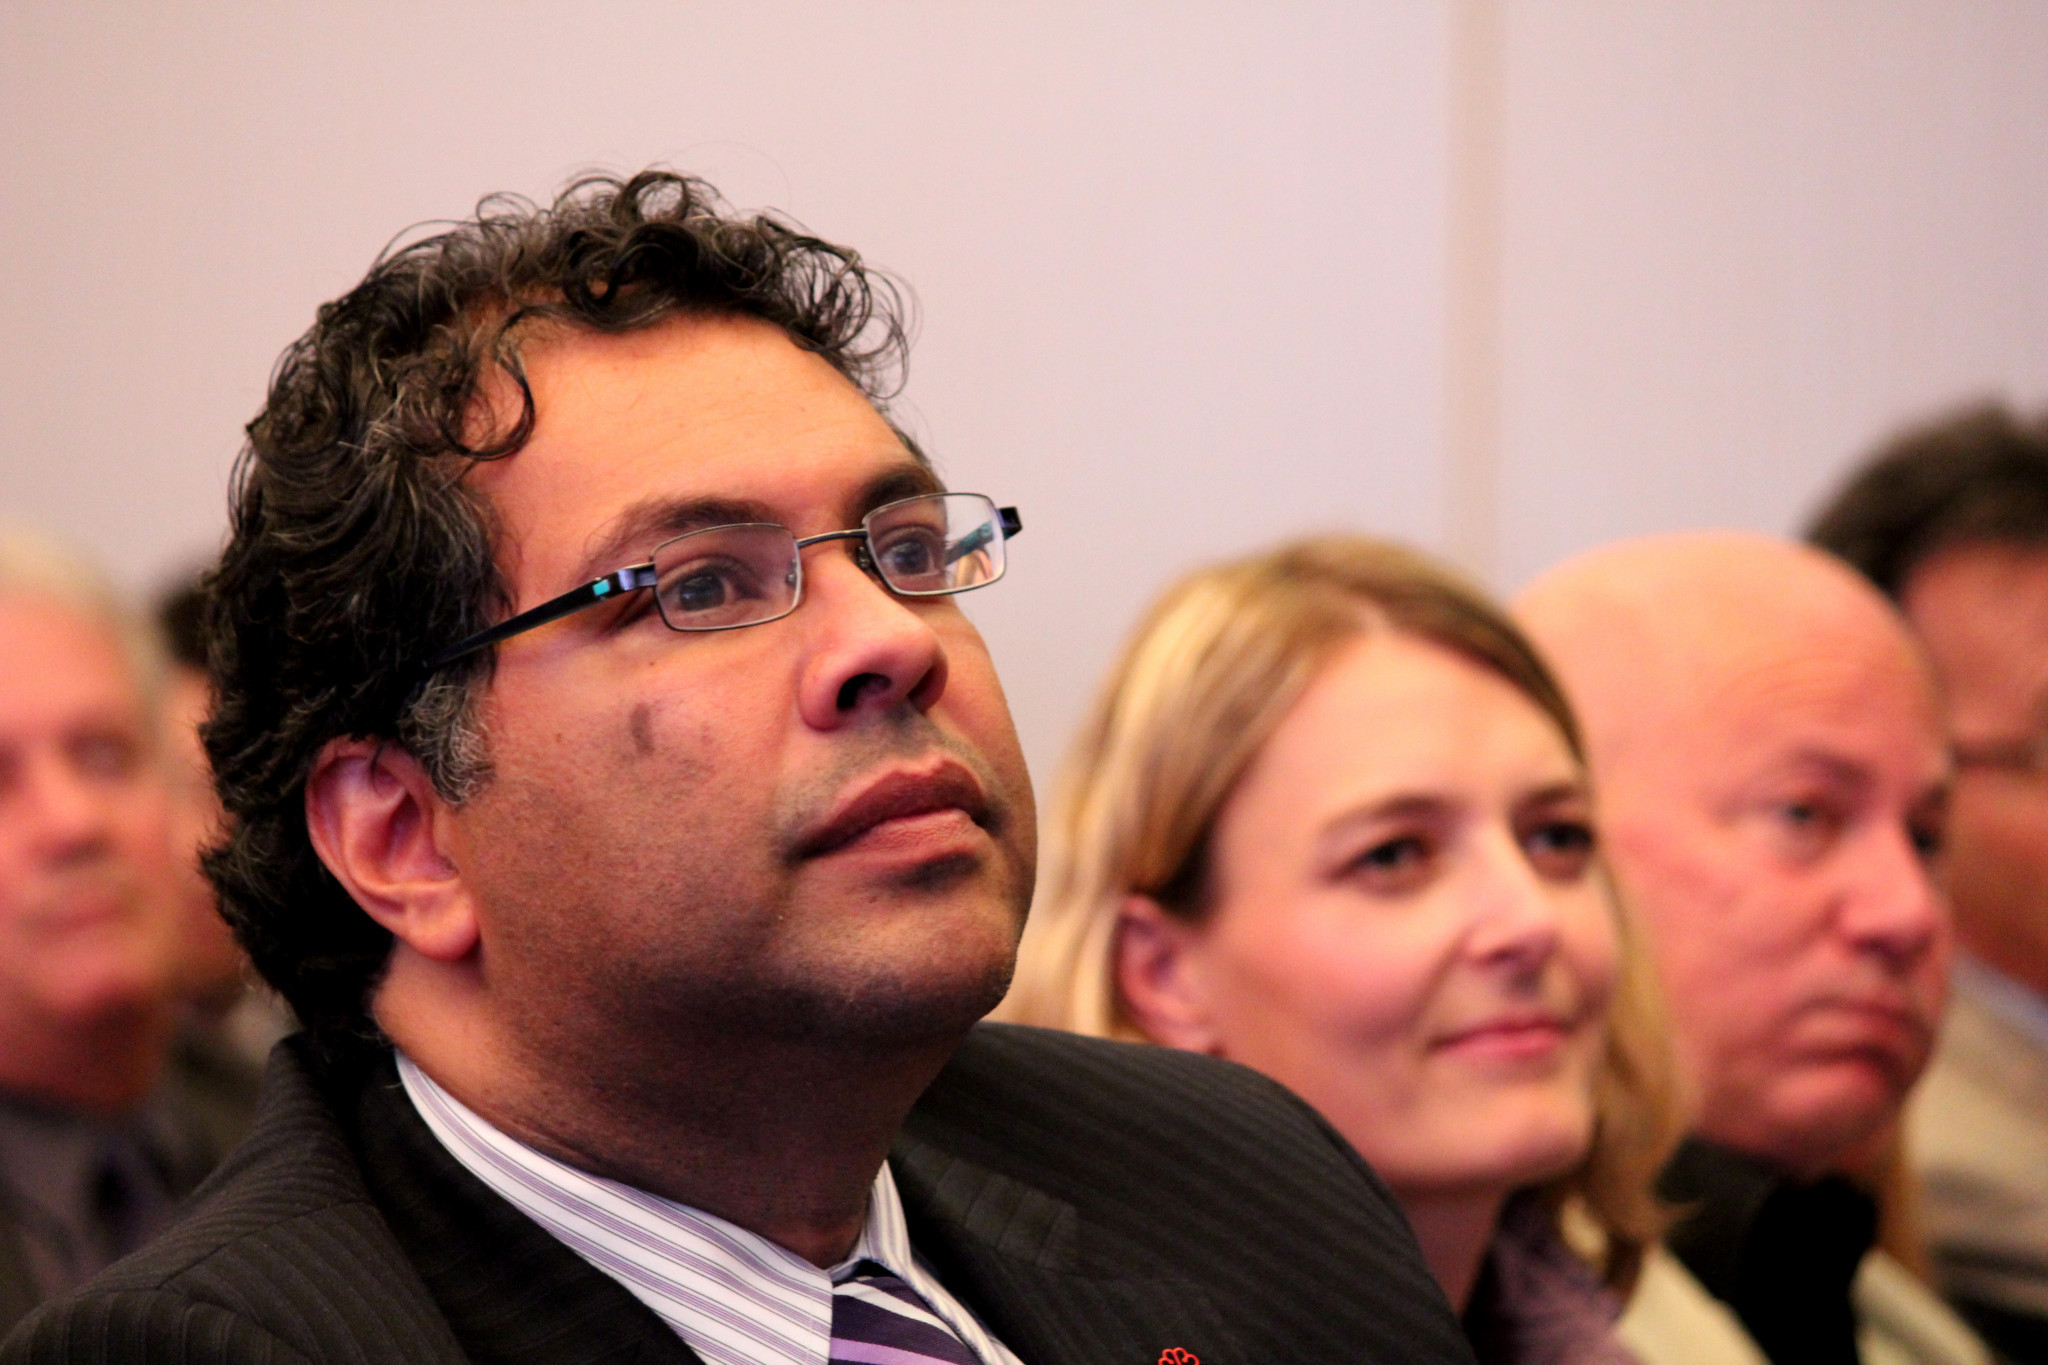 Calgary Mayor Naheed Nenshi hopes the City Council backing will lead to Government support ©Getty Images